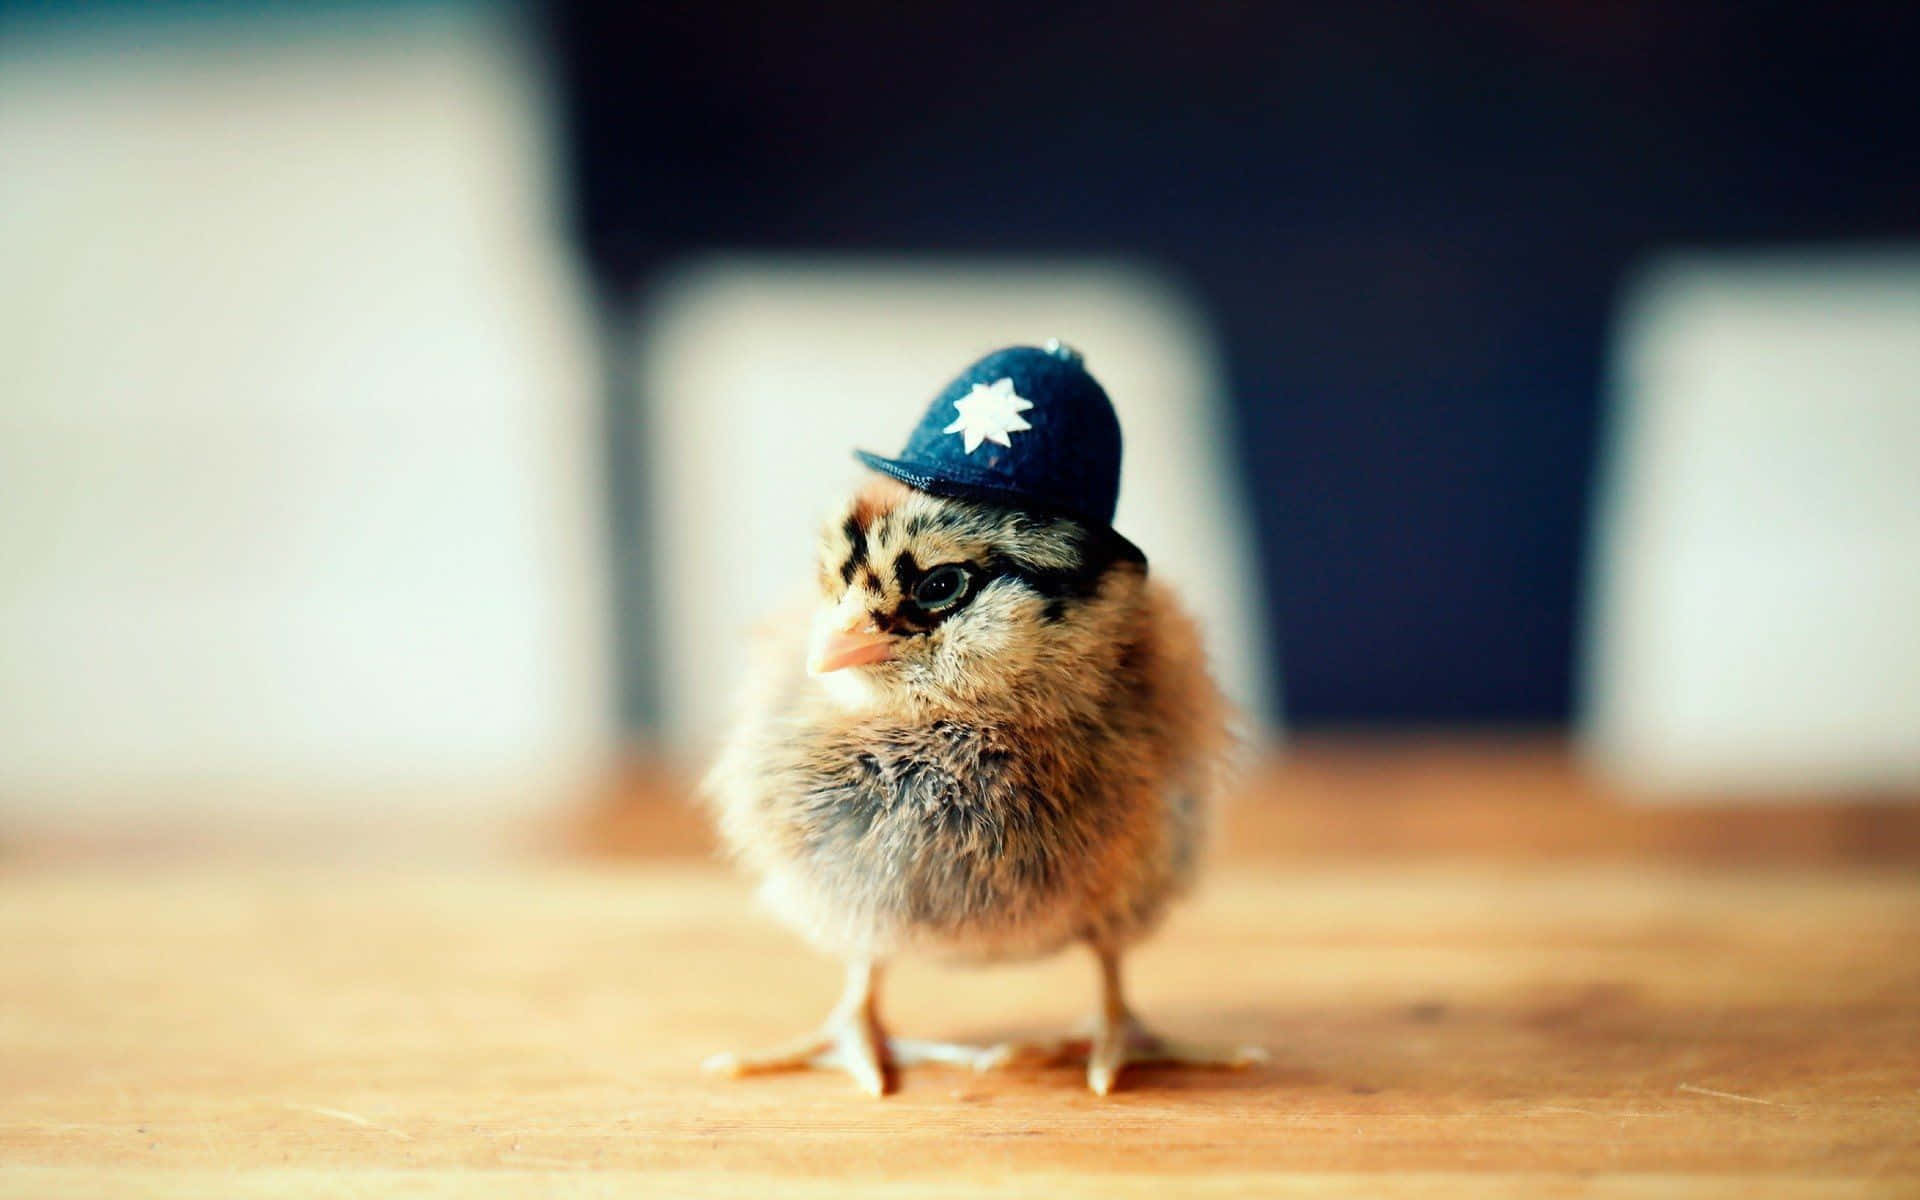 A Chicken Wearing A Police Hat On A Table